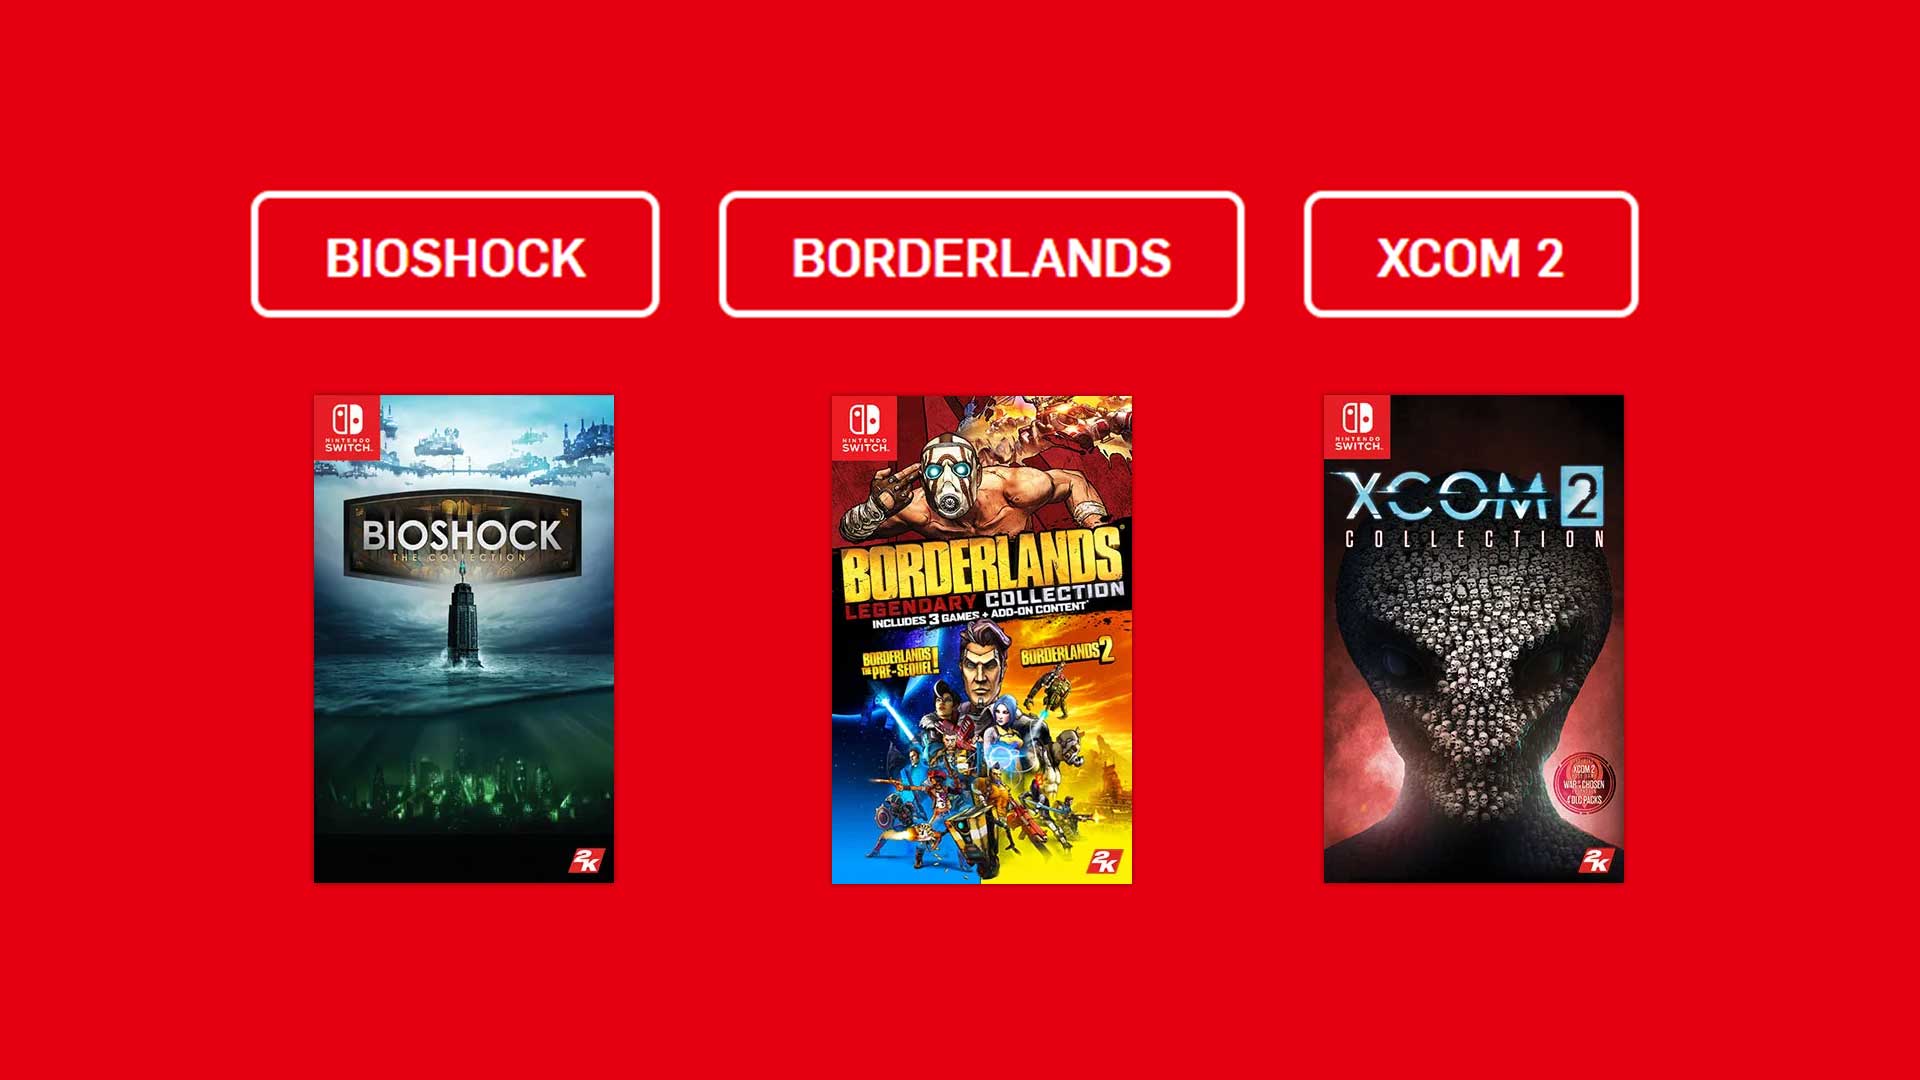 2k games switch collections